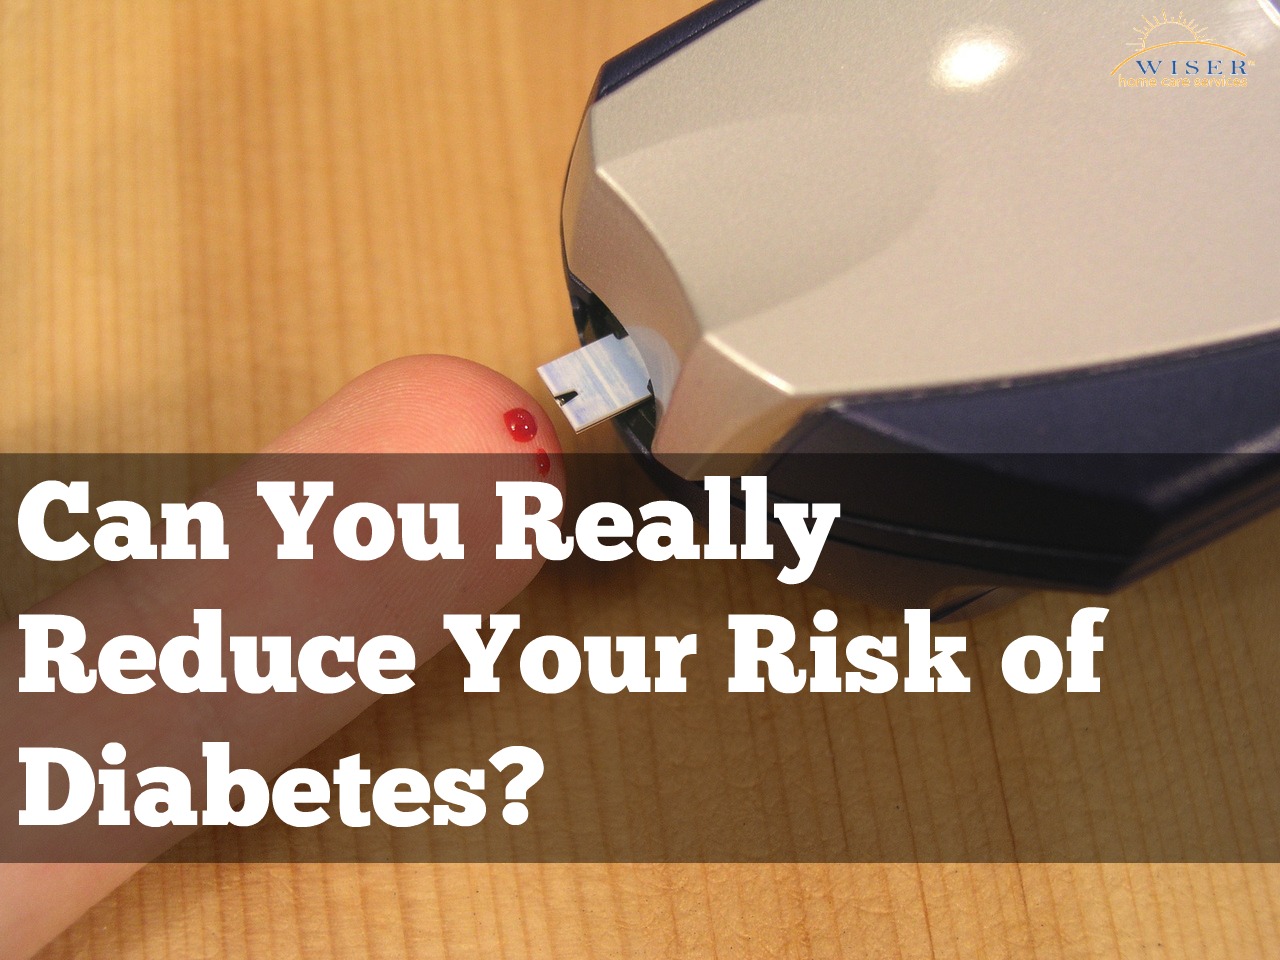 Despite being fairly preventable, Diabetes is the 7th leading cause of death in the United States. These 6 tips will reduce your risk of diabetes.